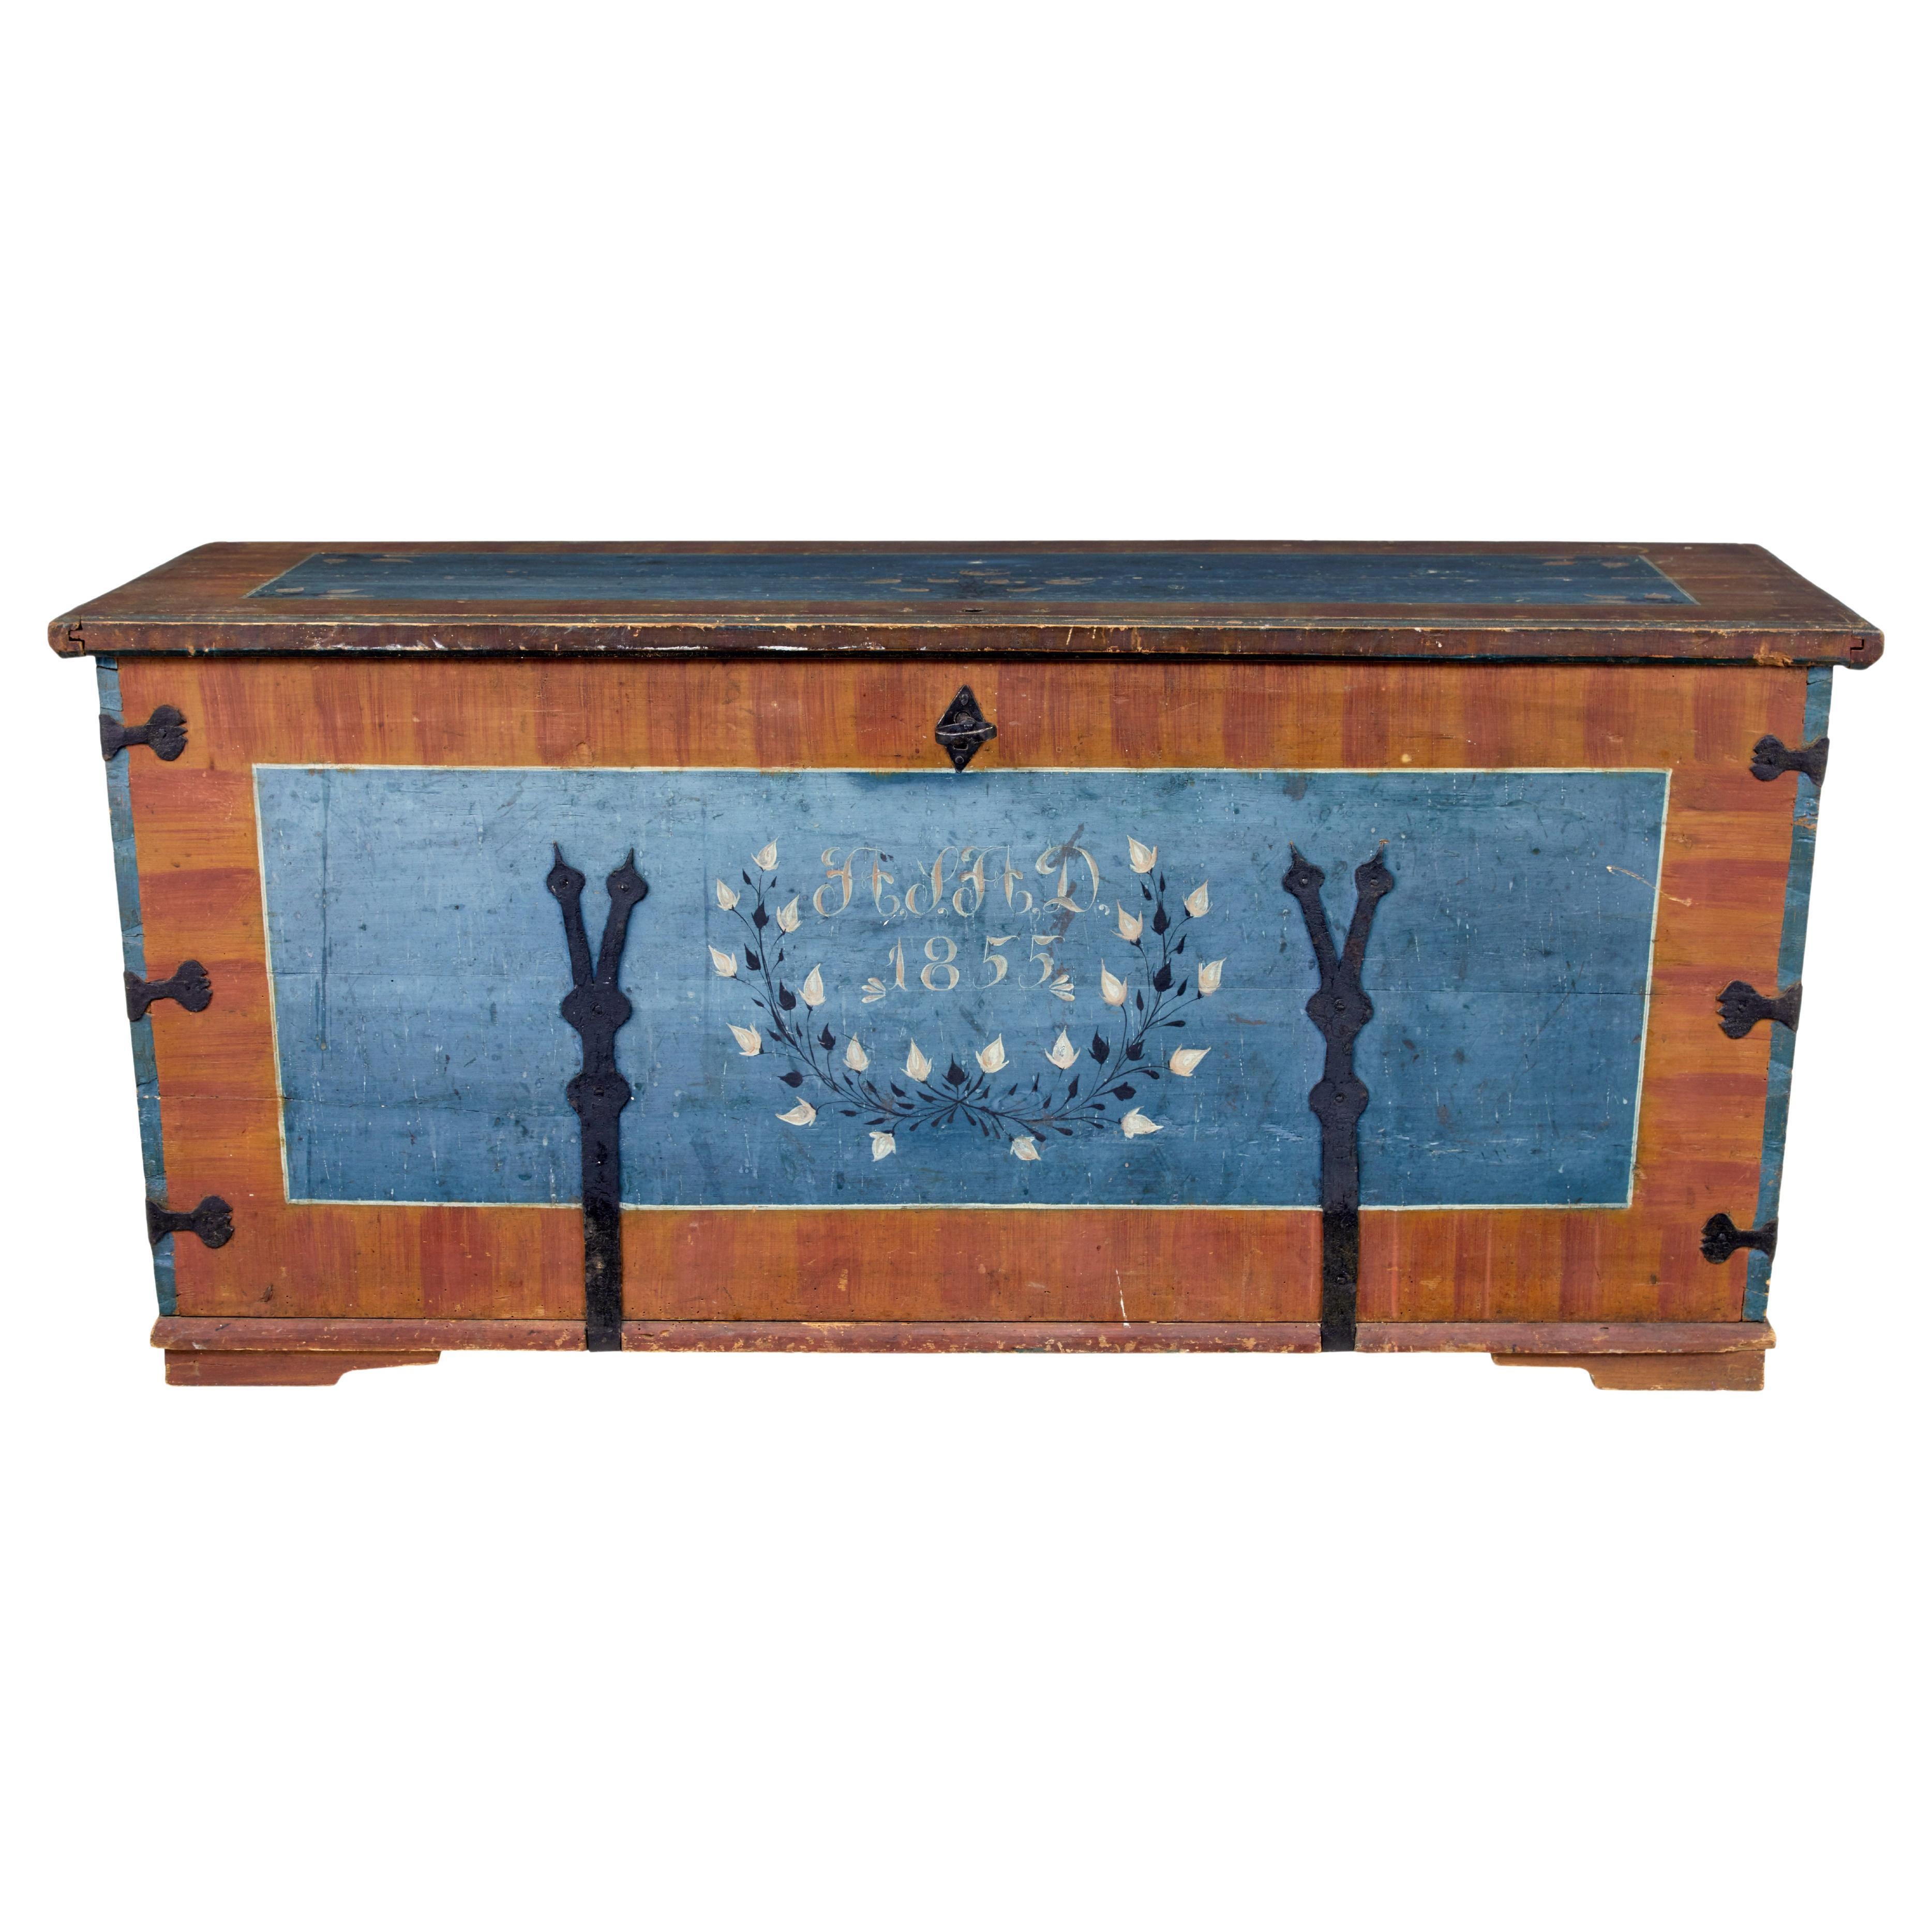 Mid 19th century traditional Swedish painted coffer